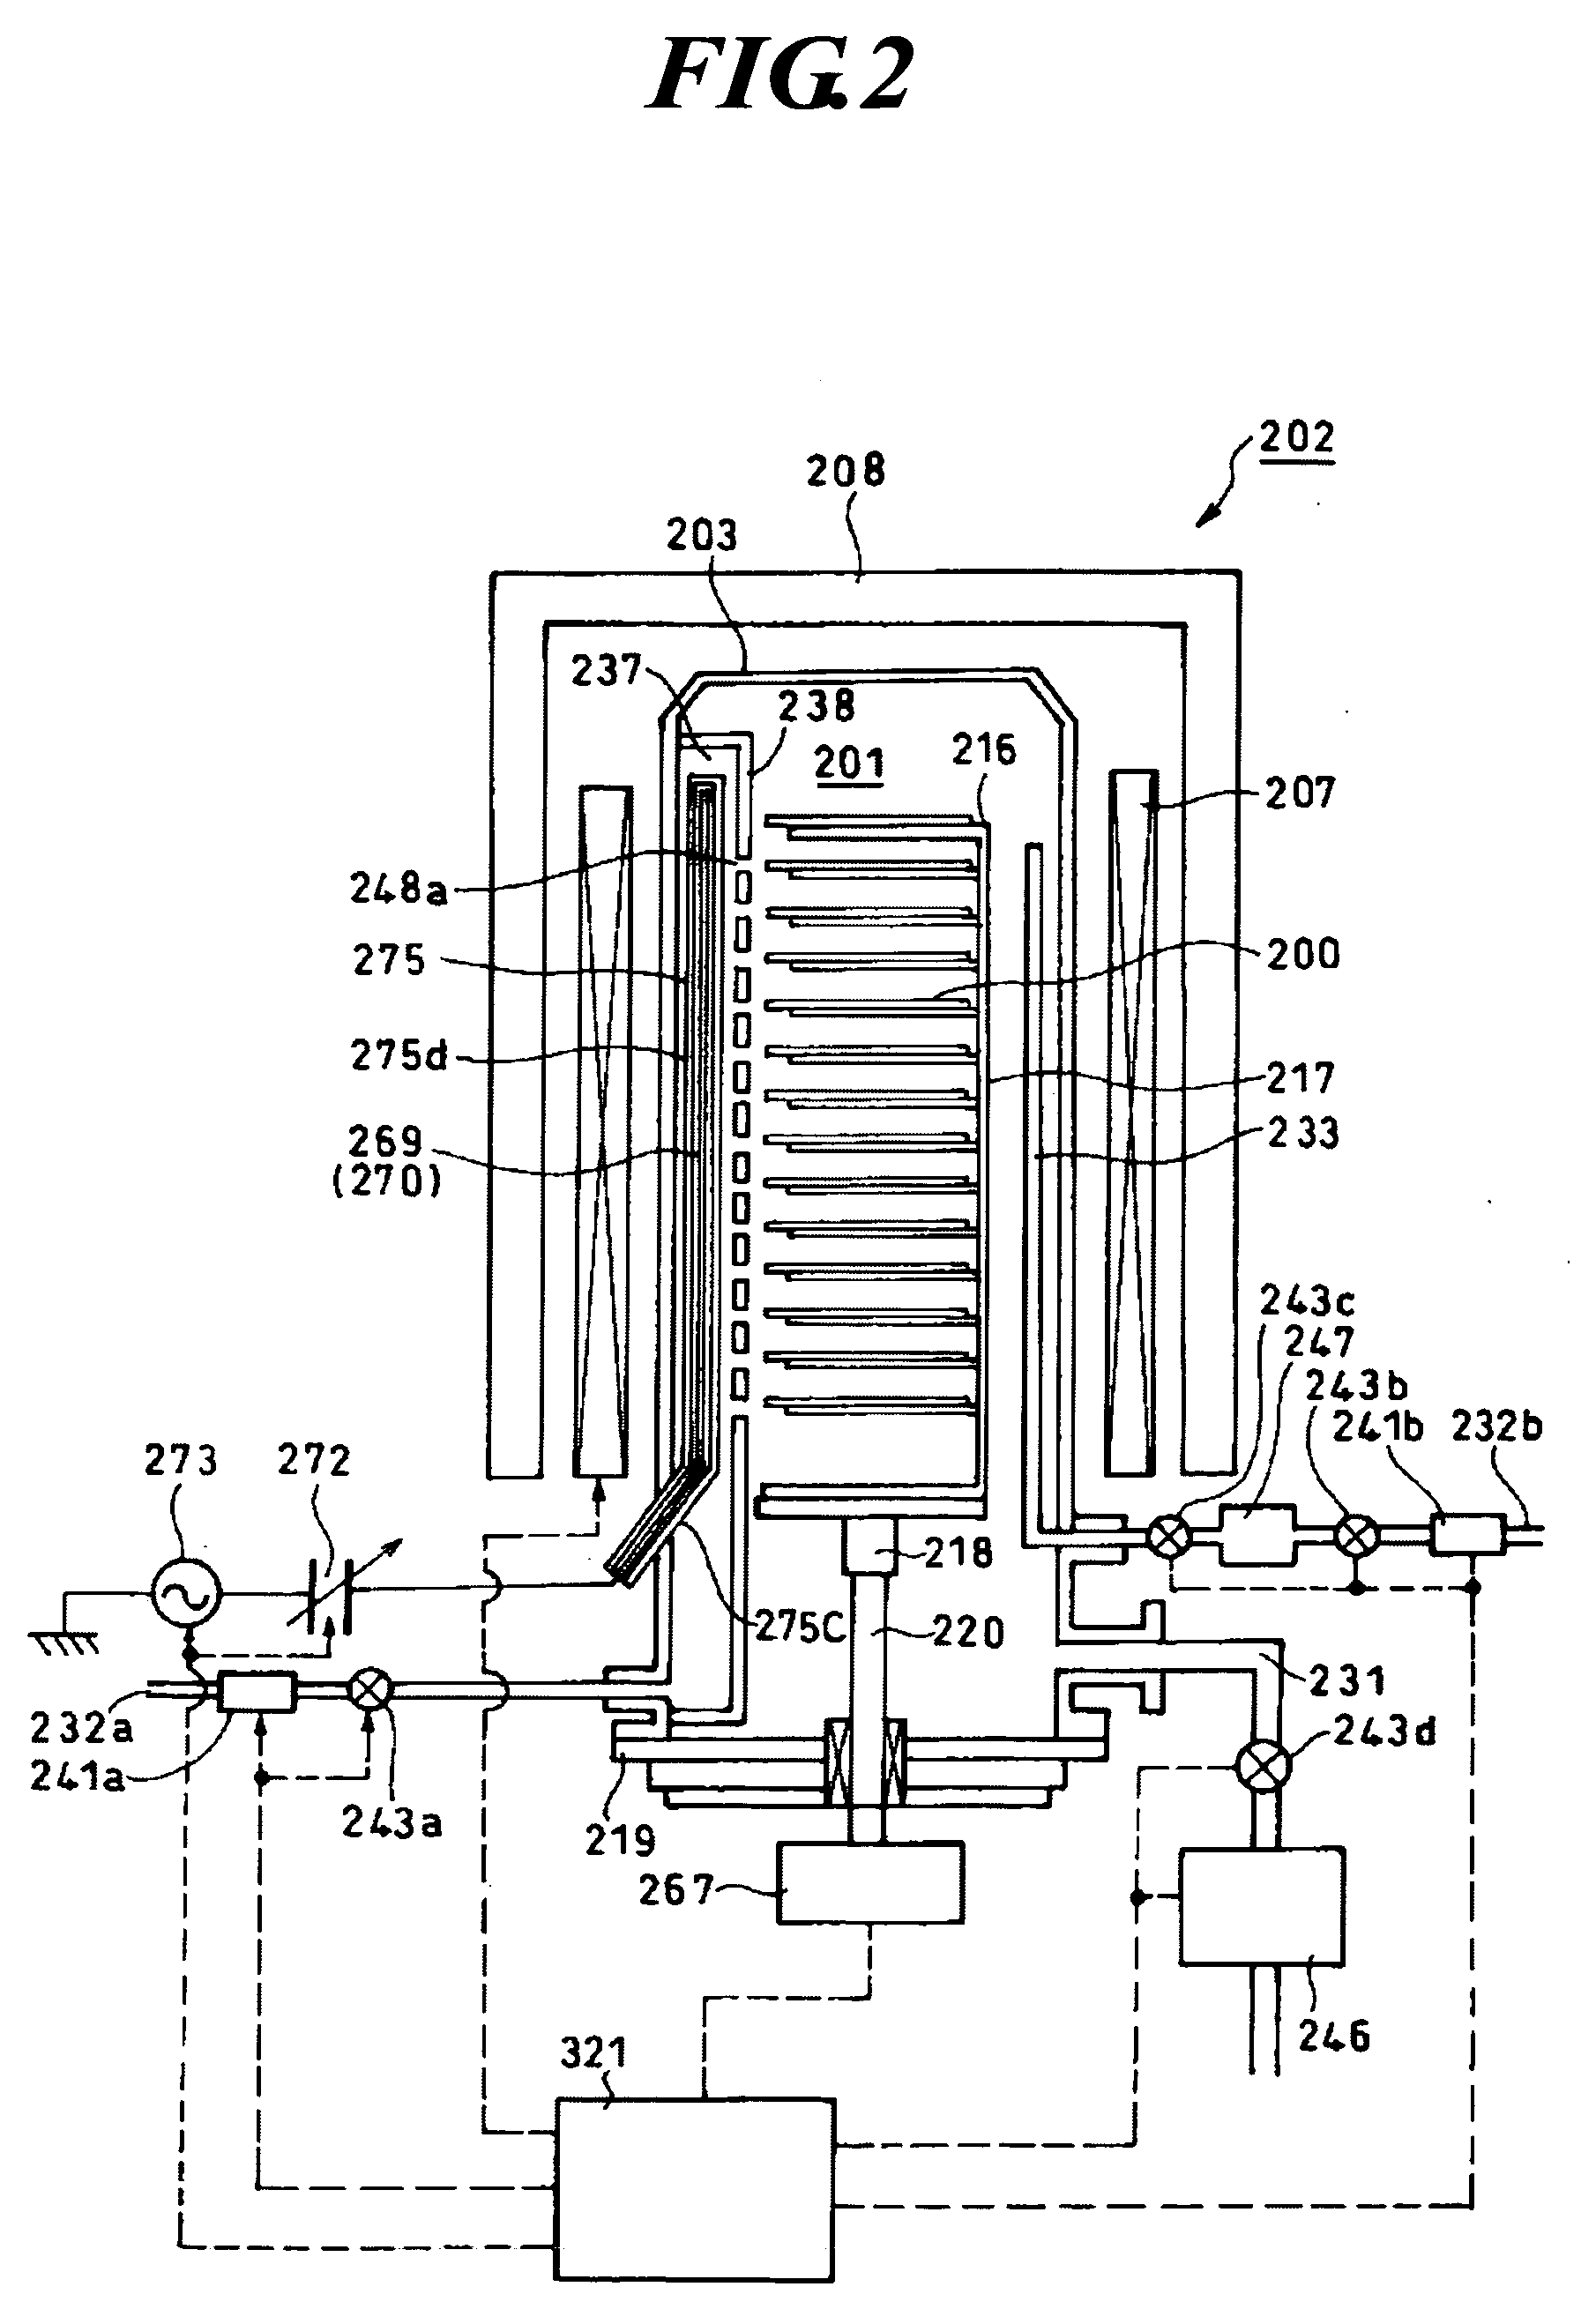 Substrate Processing Apparatus